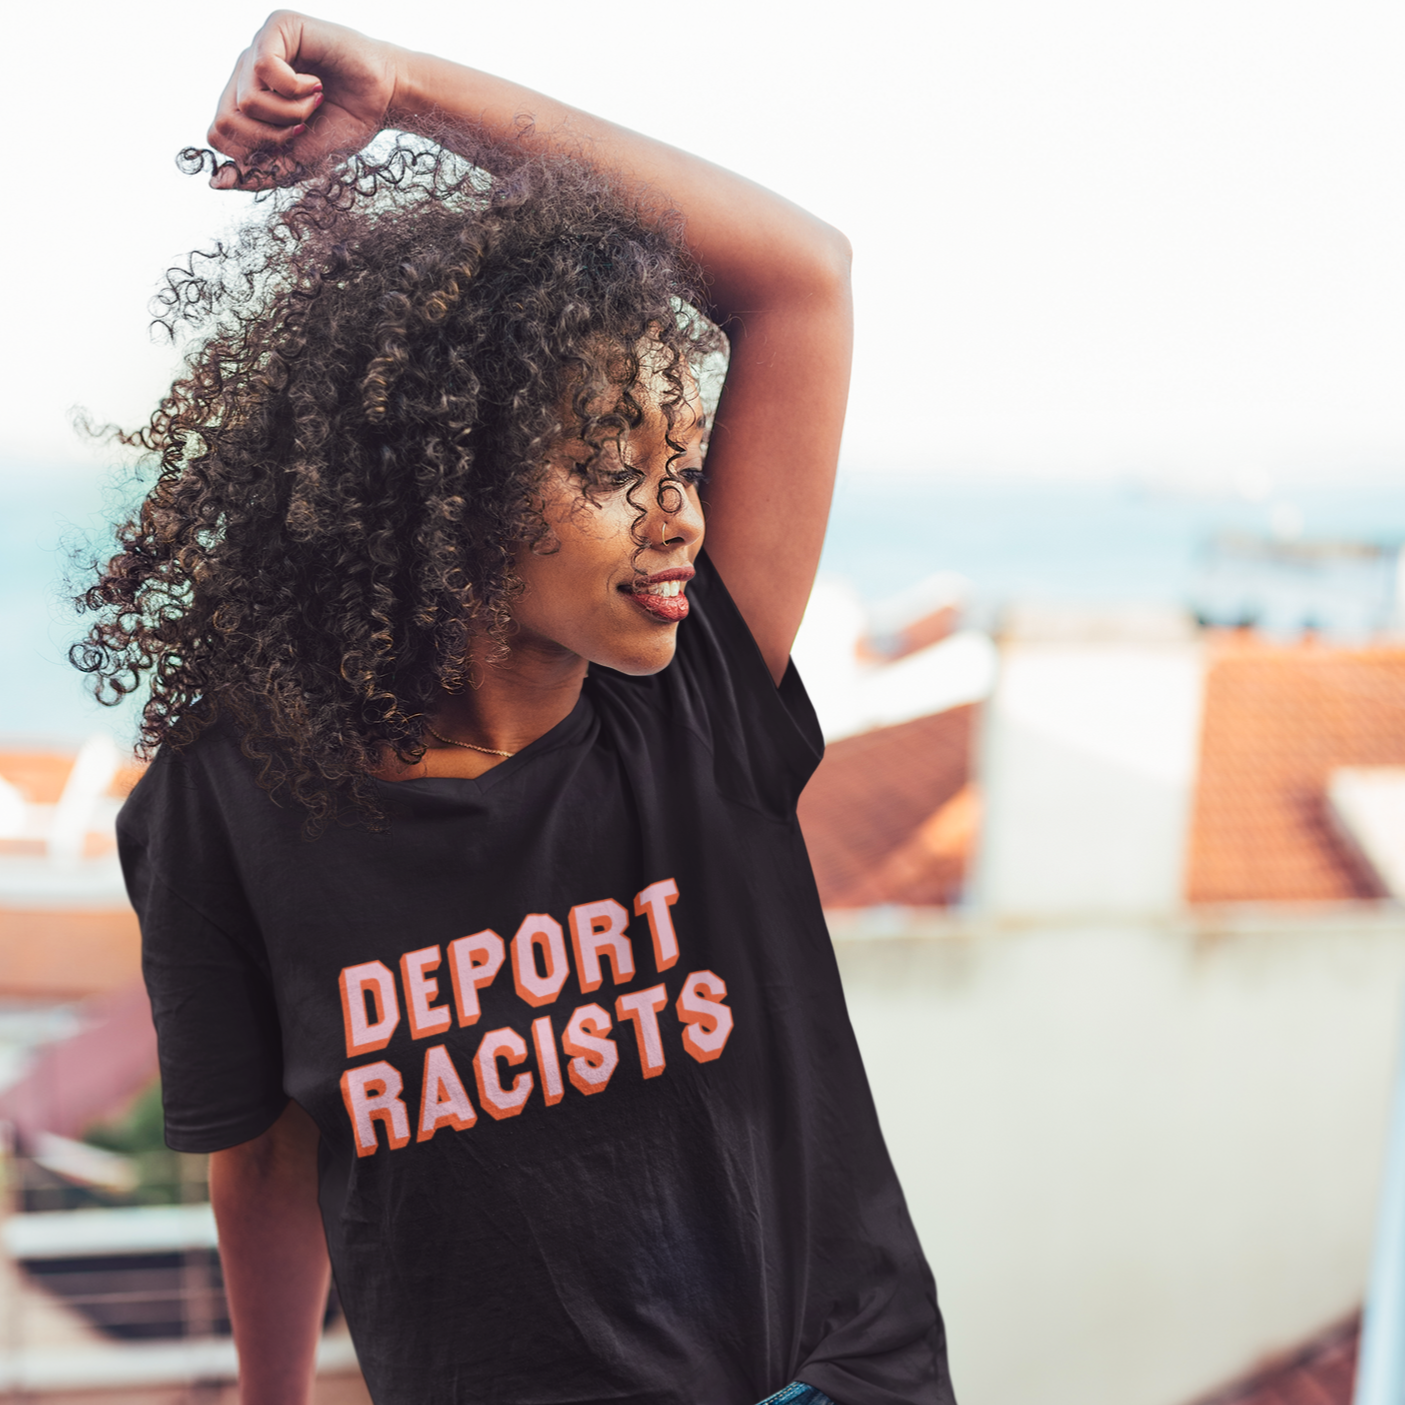 Black feminist t shirt boldly advocating "Deport Racists" in peach writing - Shop Feminist Apparel